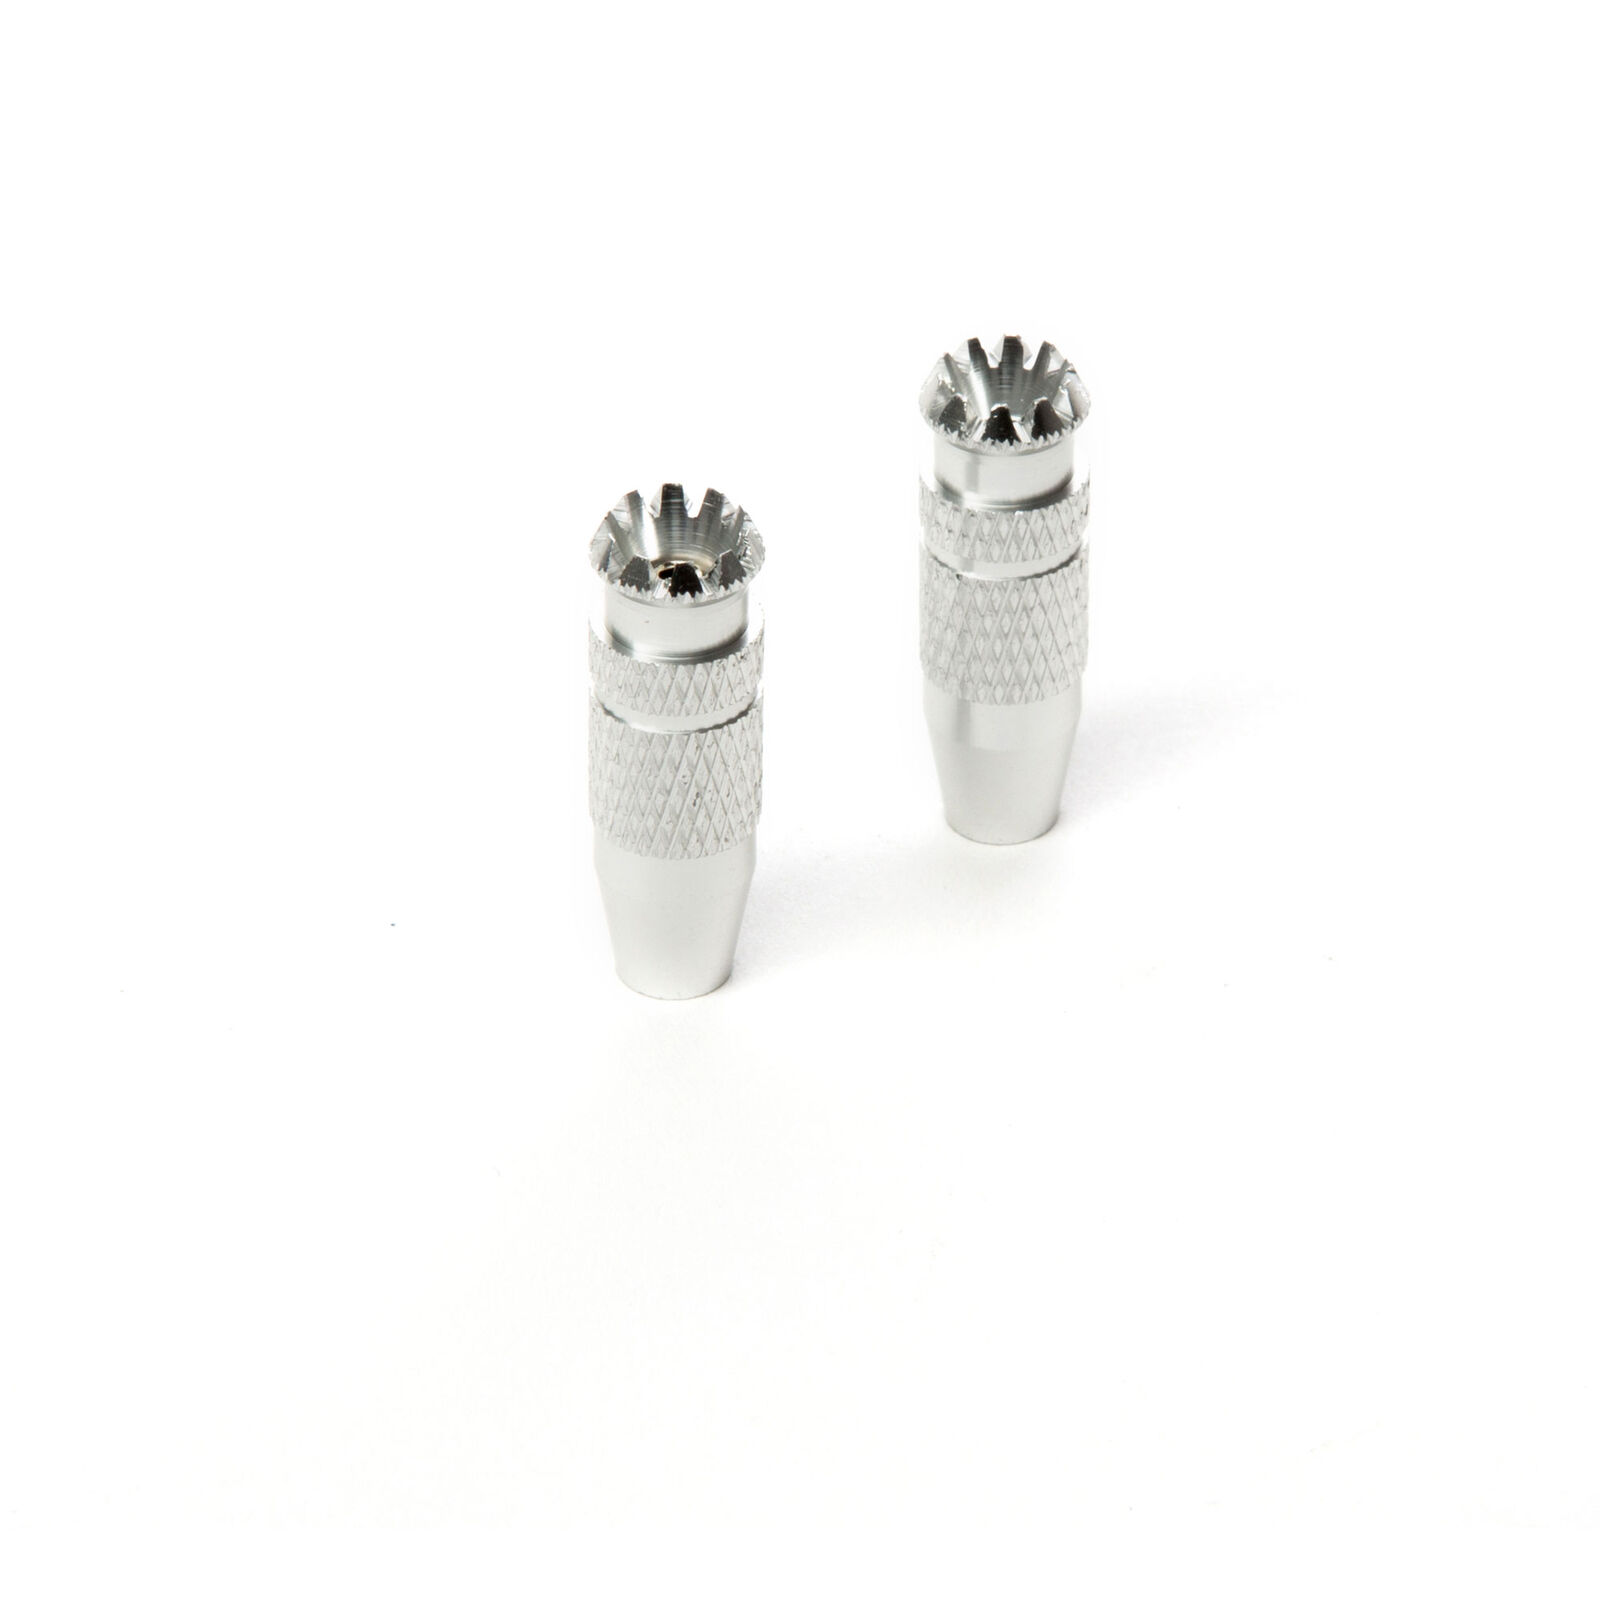 Gimbal Stick Ends 24mm Silver (2): DXe